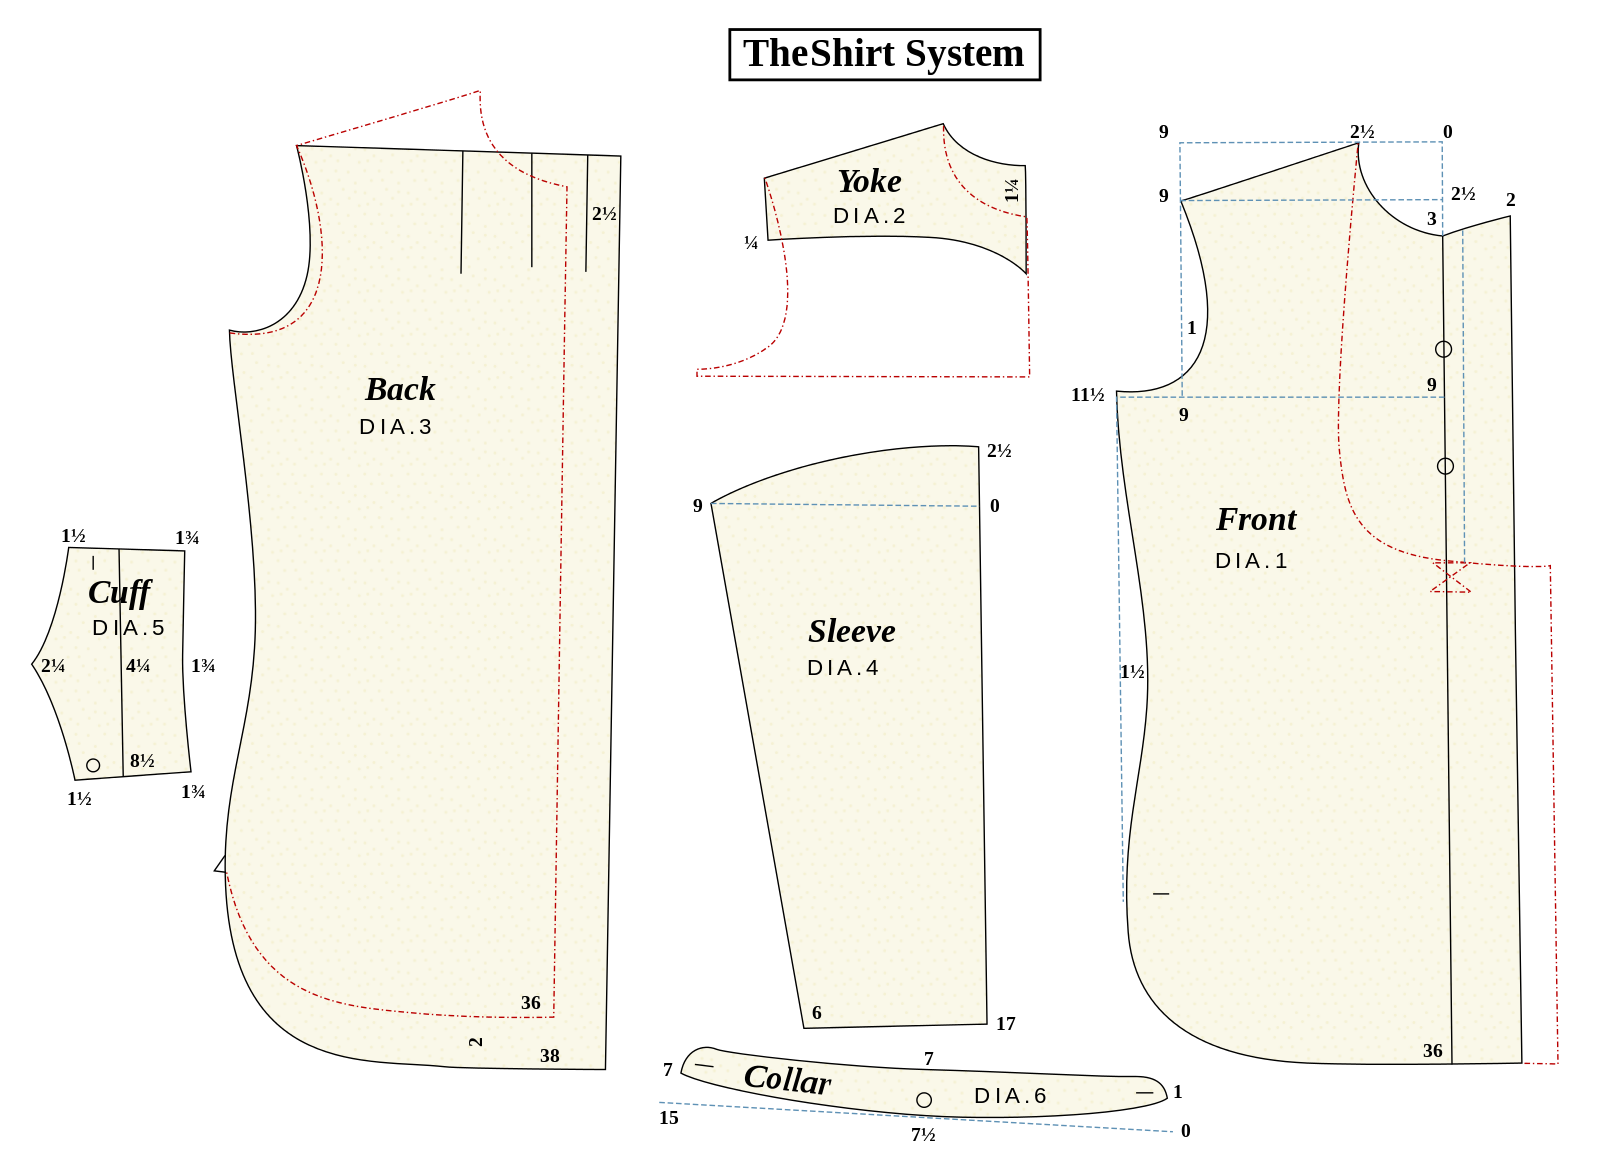 Digitized pattern from a nineteenth century pattern book showing the breakdown of the shirt system consisting of six pattern pieces consisting of a cuff, back, yoke, sleeve, collar, and front with the pieces being duplicated to create a complete shirt.